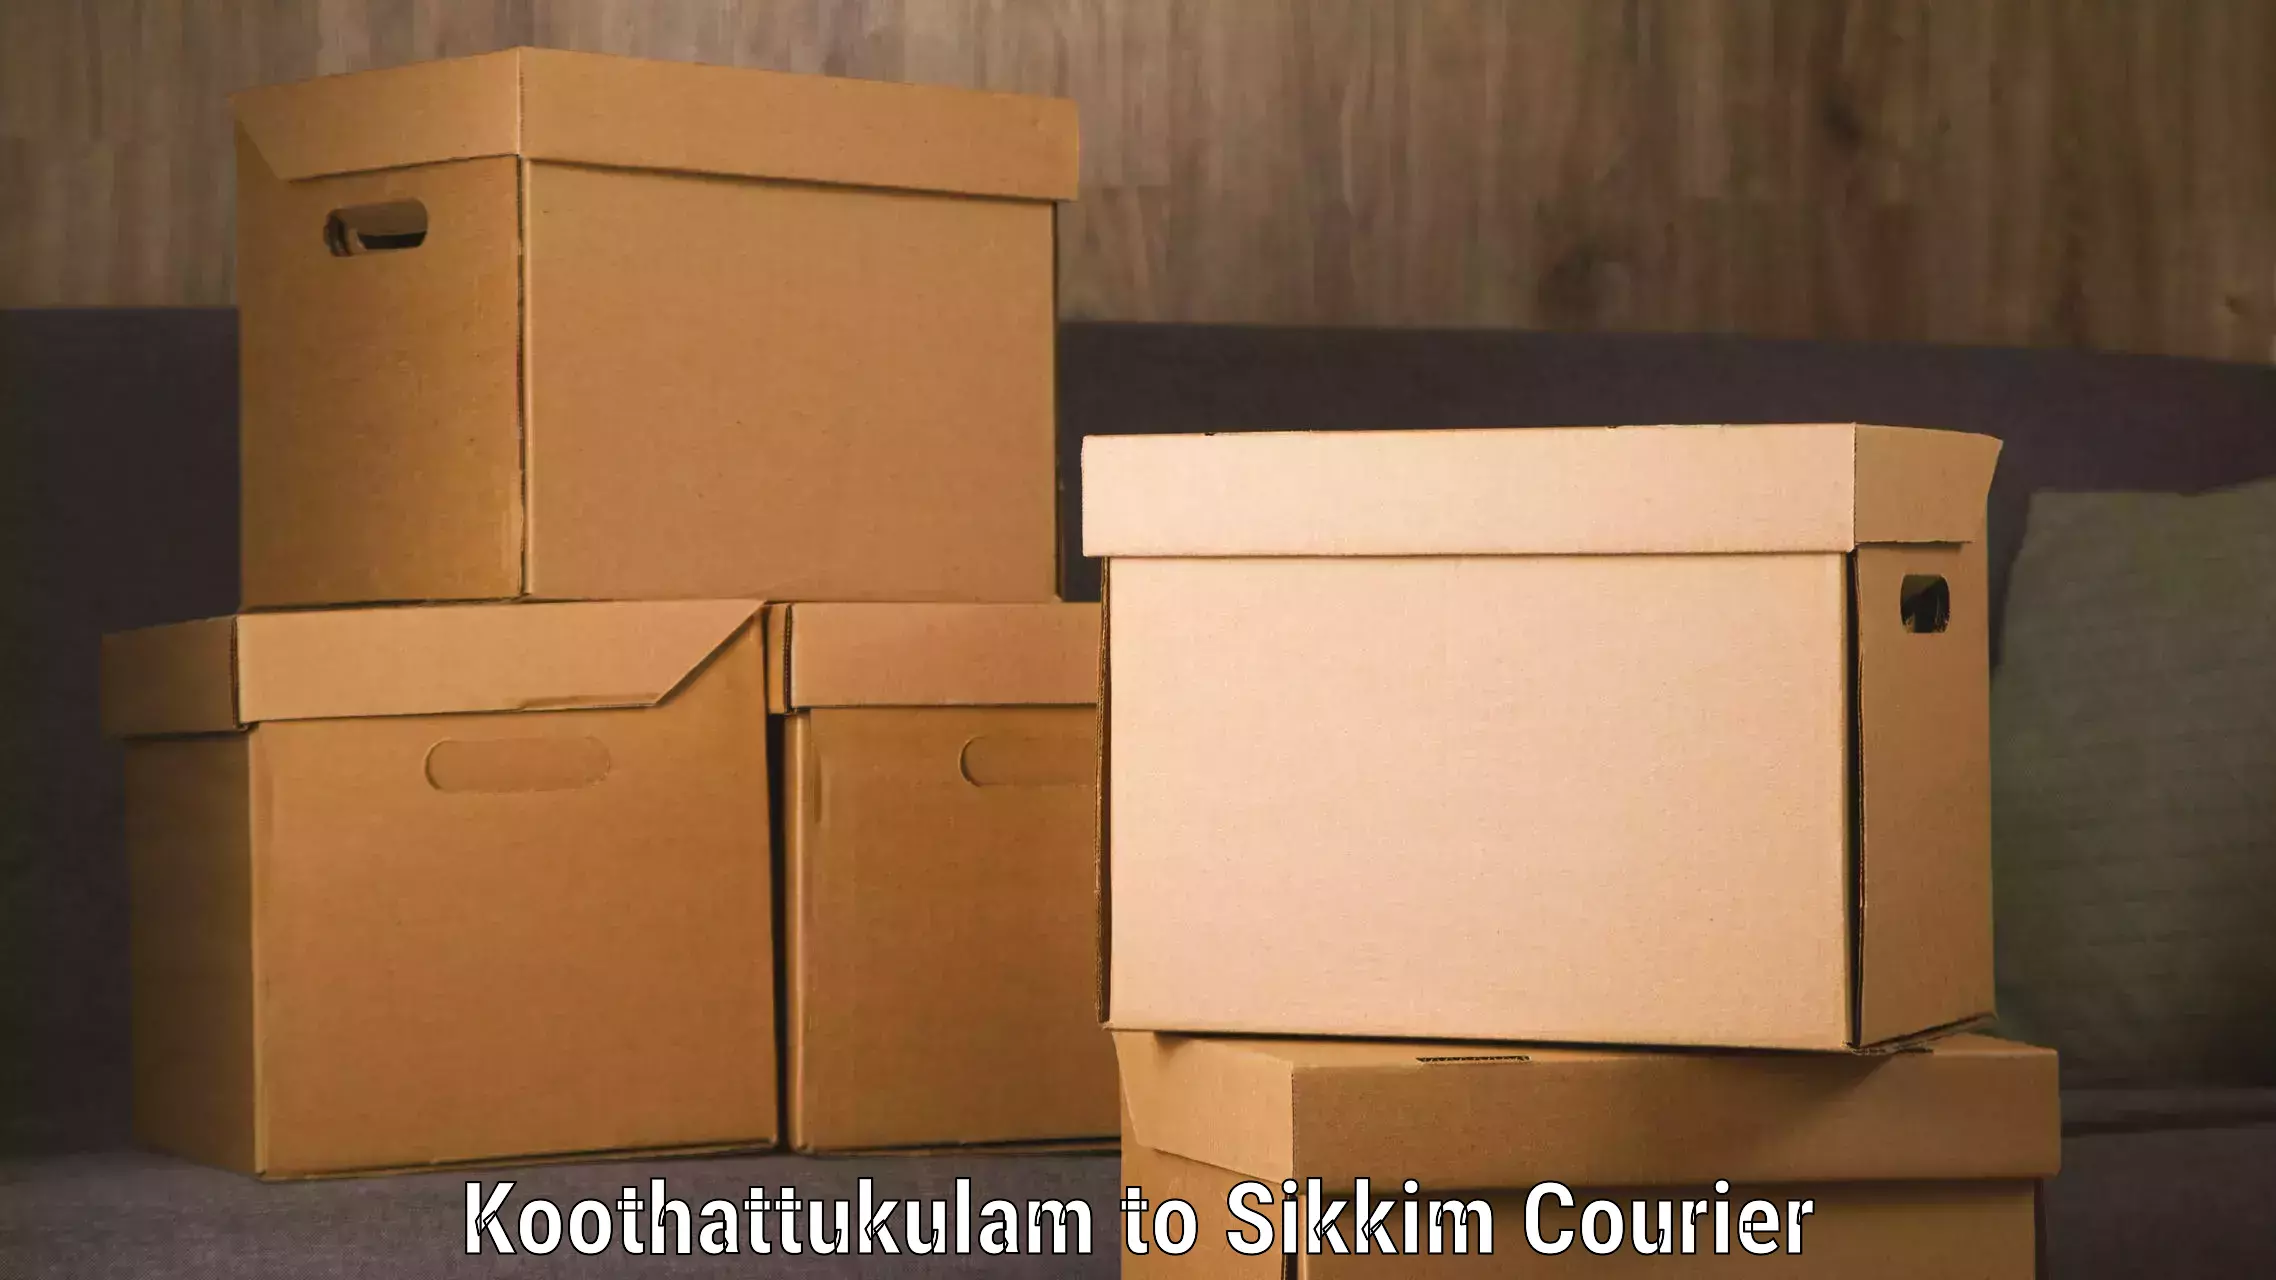 Courier service partnerships Koothattukulam to Pelling